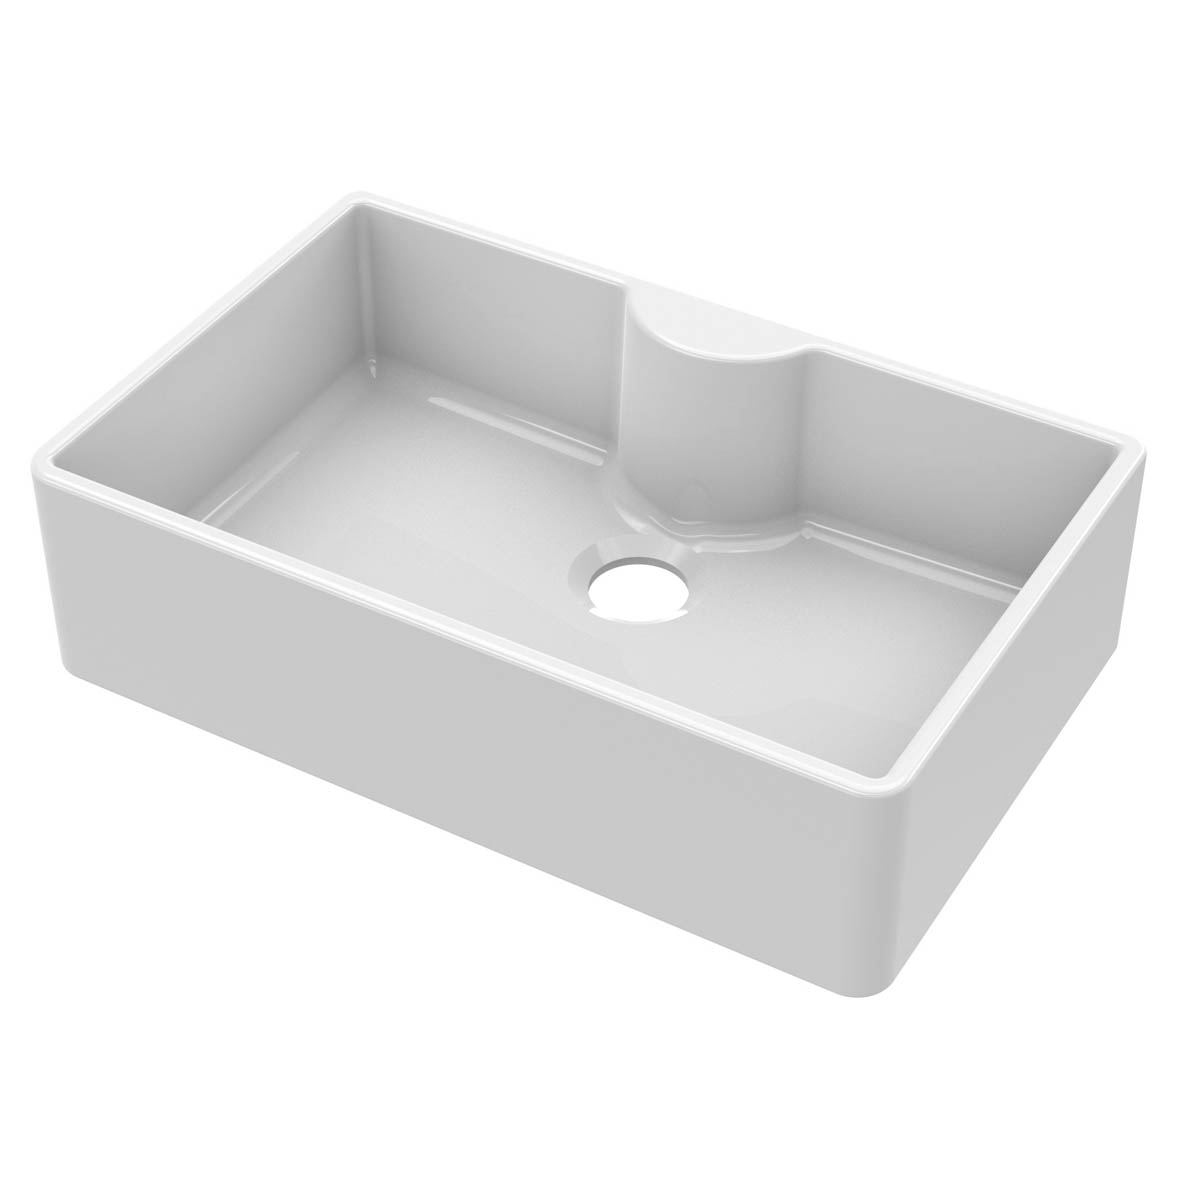 Nuie Butler 795x500x220mm Fireclay Sink with Central Waste & Tap Ledge - White (20290)